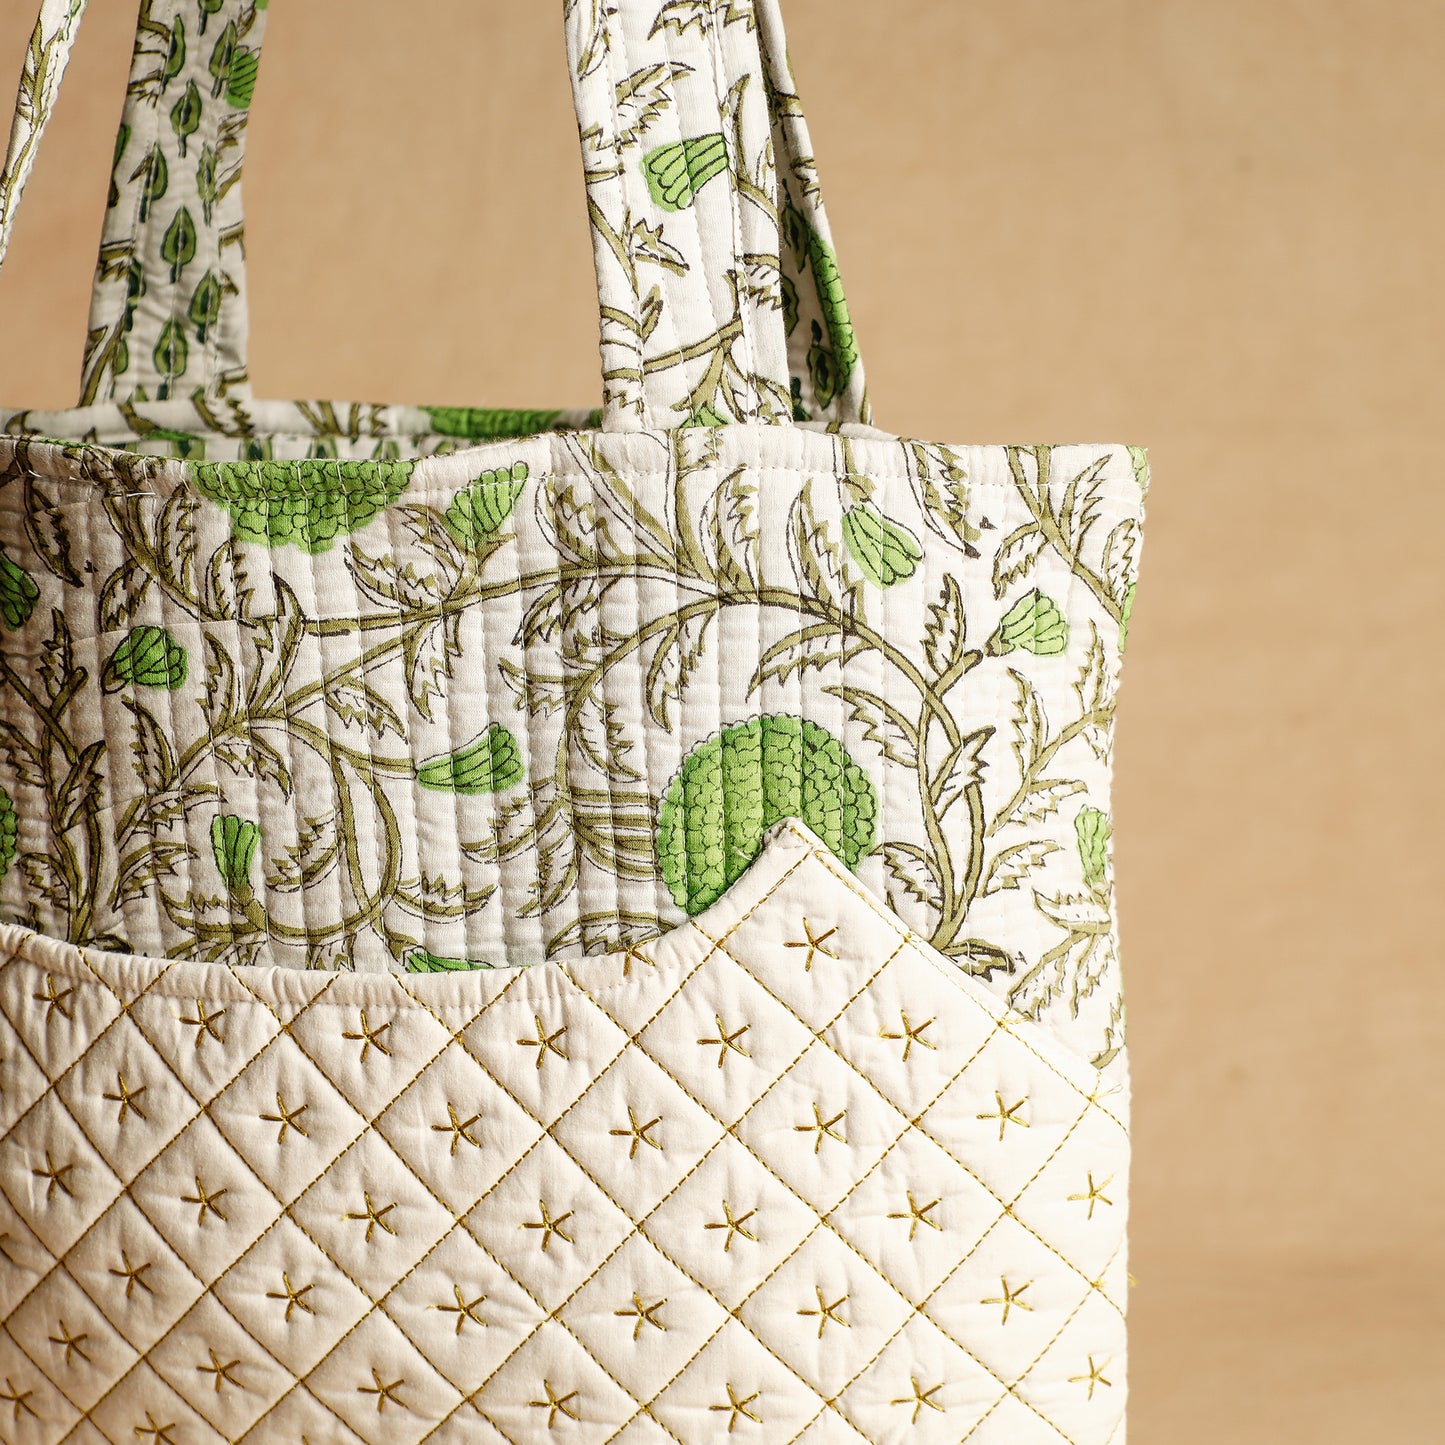 White - Handcrafted Sanganeri Quilted Cotton Shoulder Bag